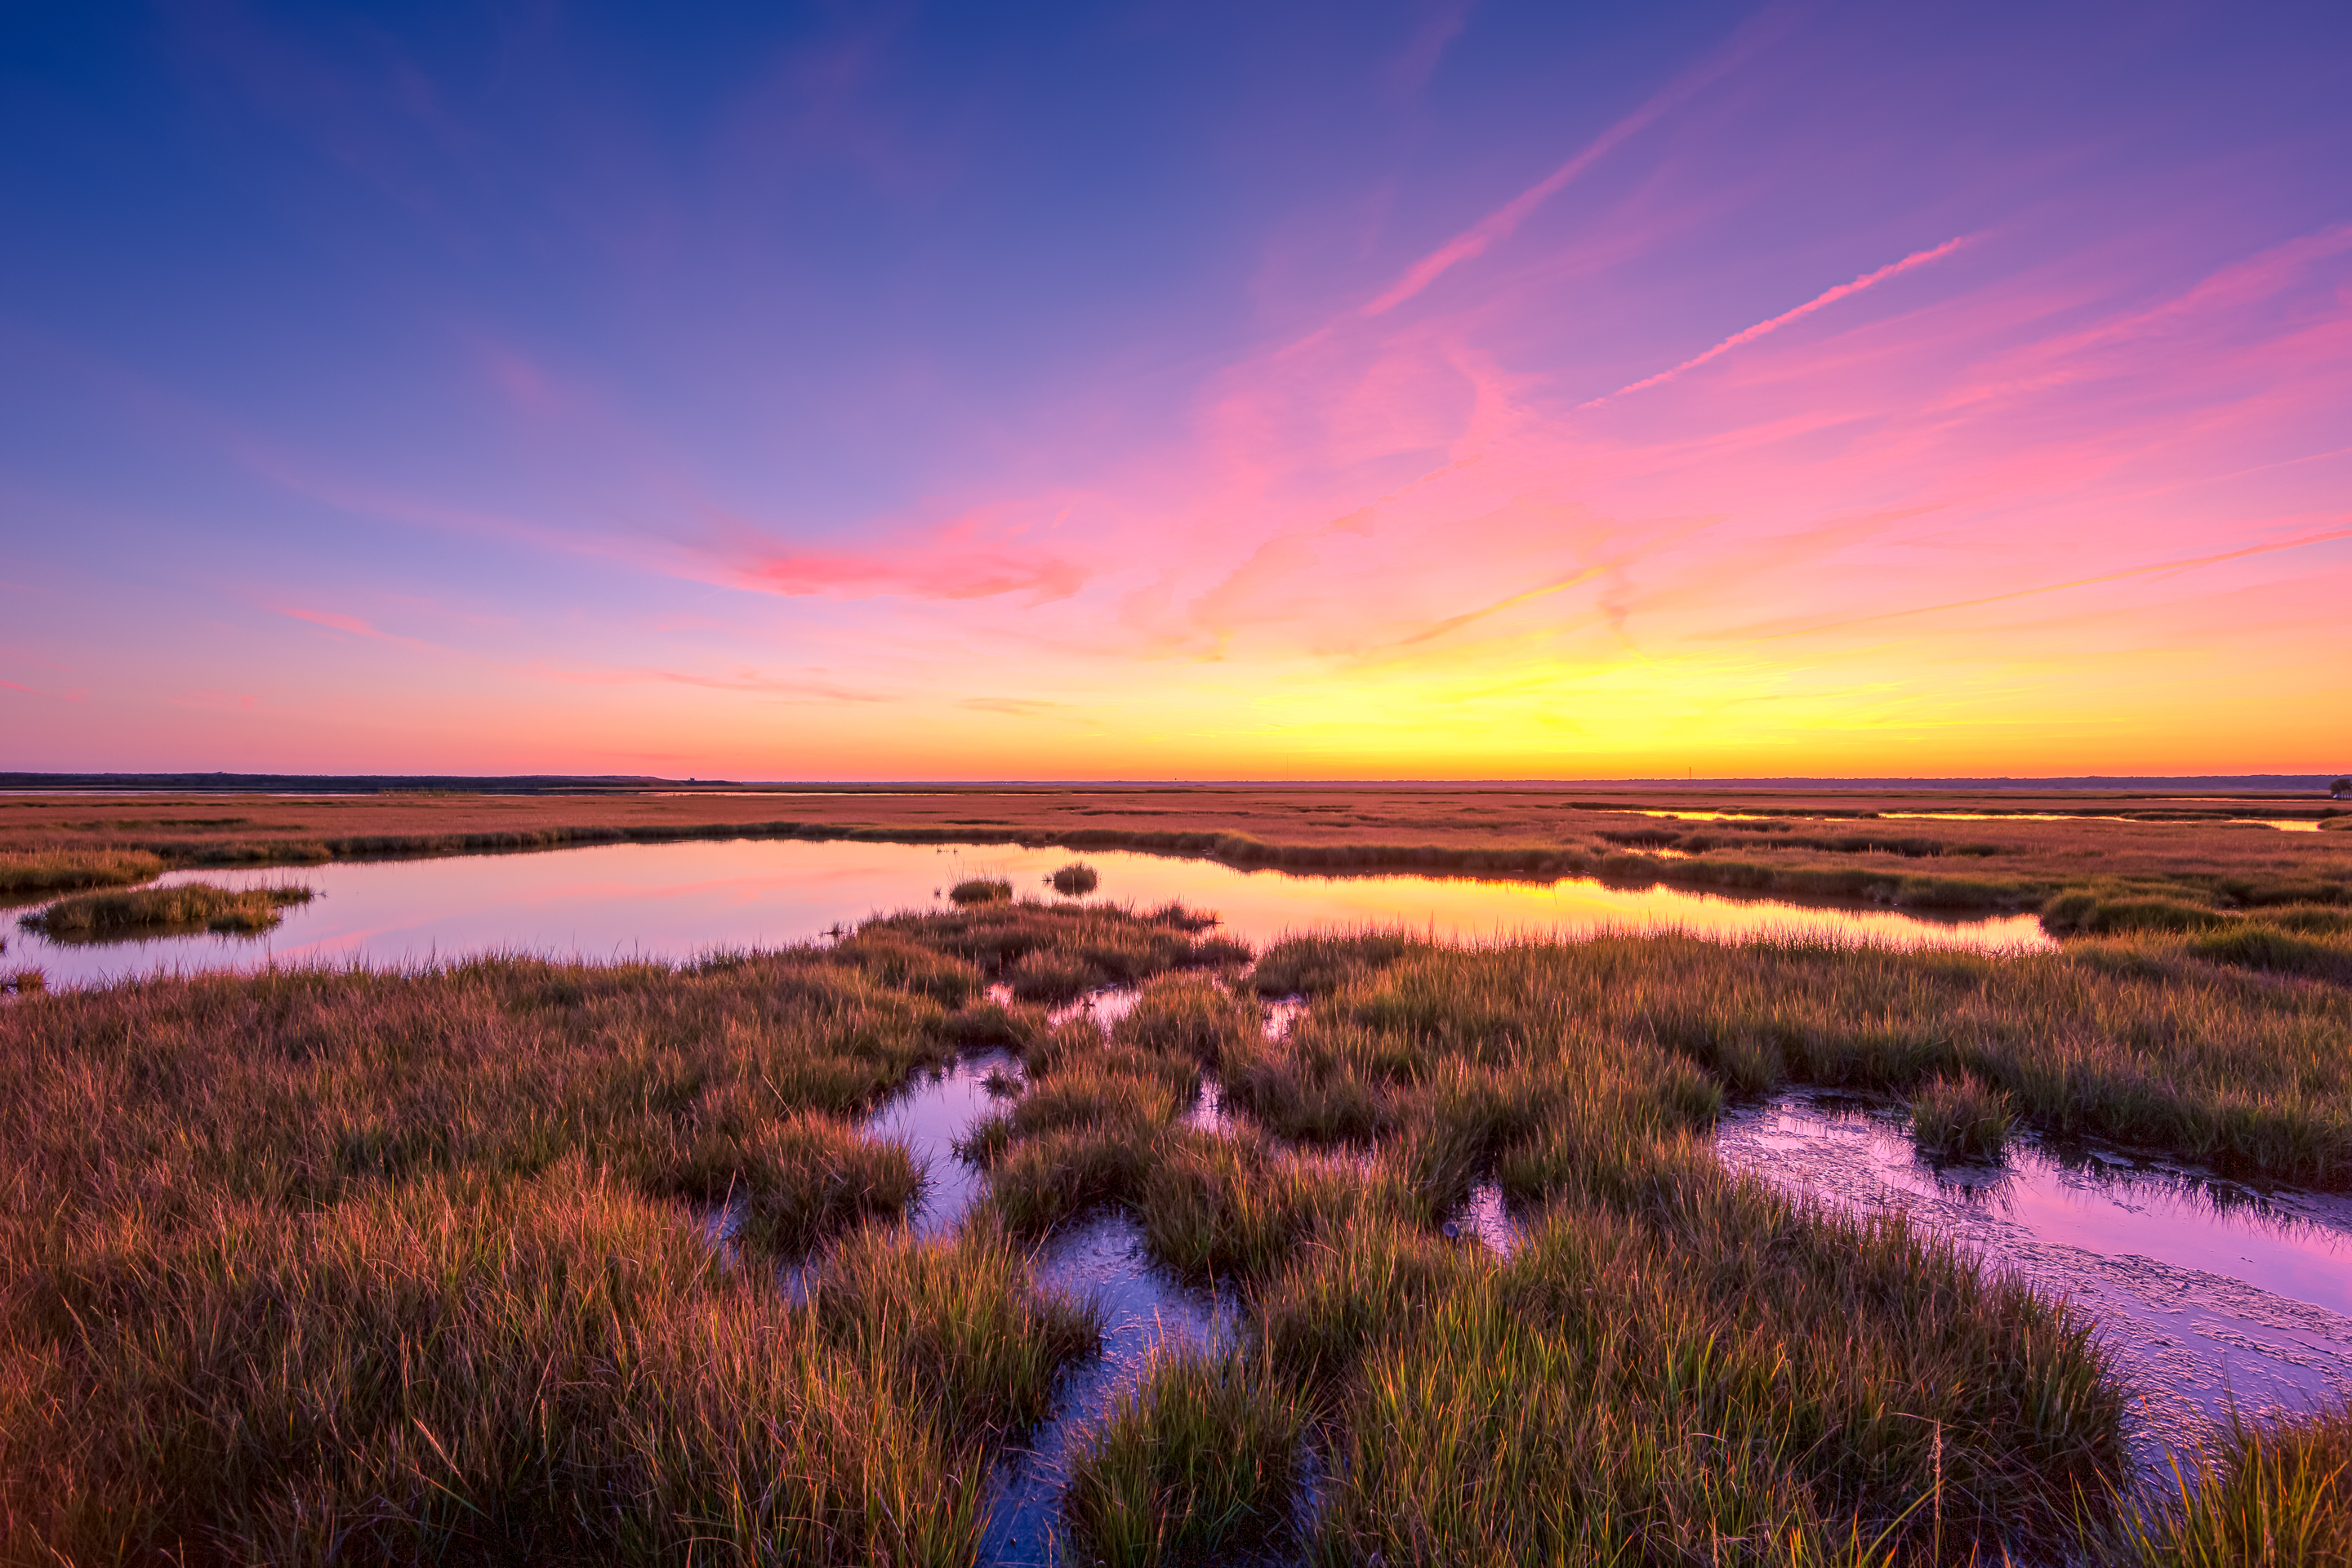 14mm wide angle sunset photo with pastel colored clouds over a still salt marsh.